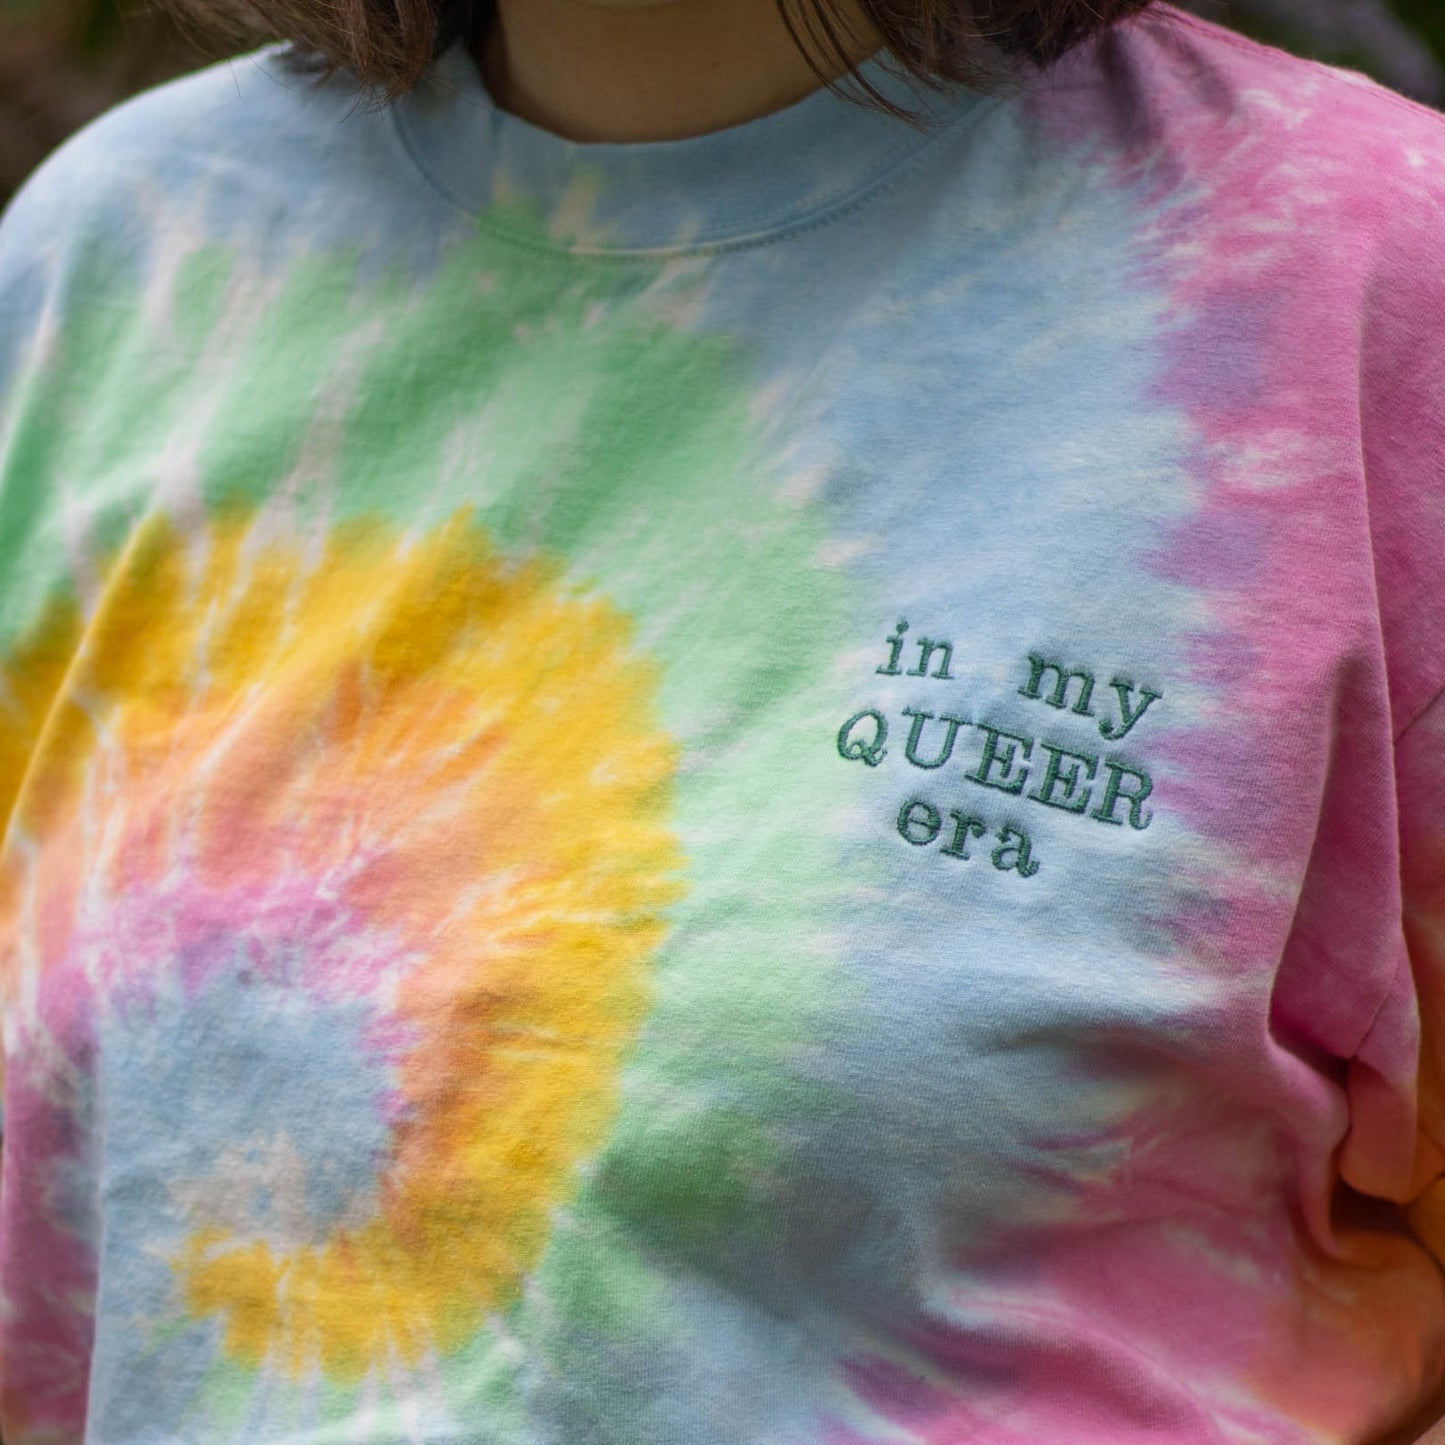 An upclose picture of a torso with a pastel tie dye shirt on. Off to the side of the shirt is the phrase "in my queer era" in green embroidery thread.